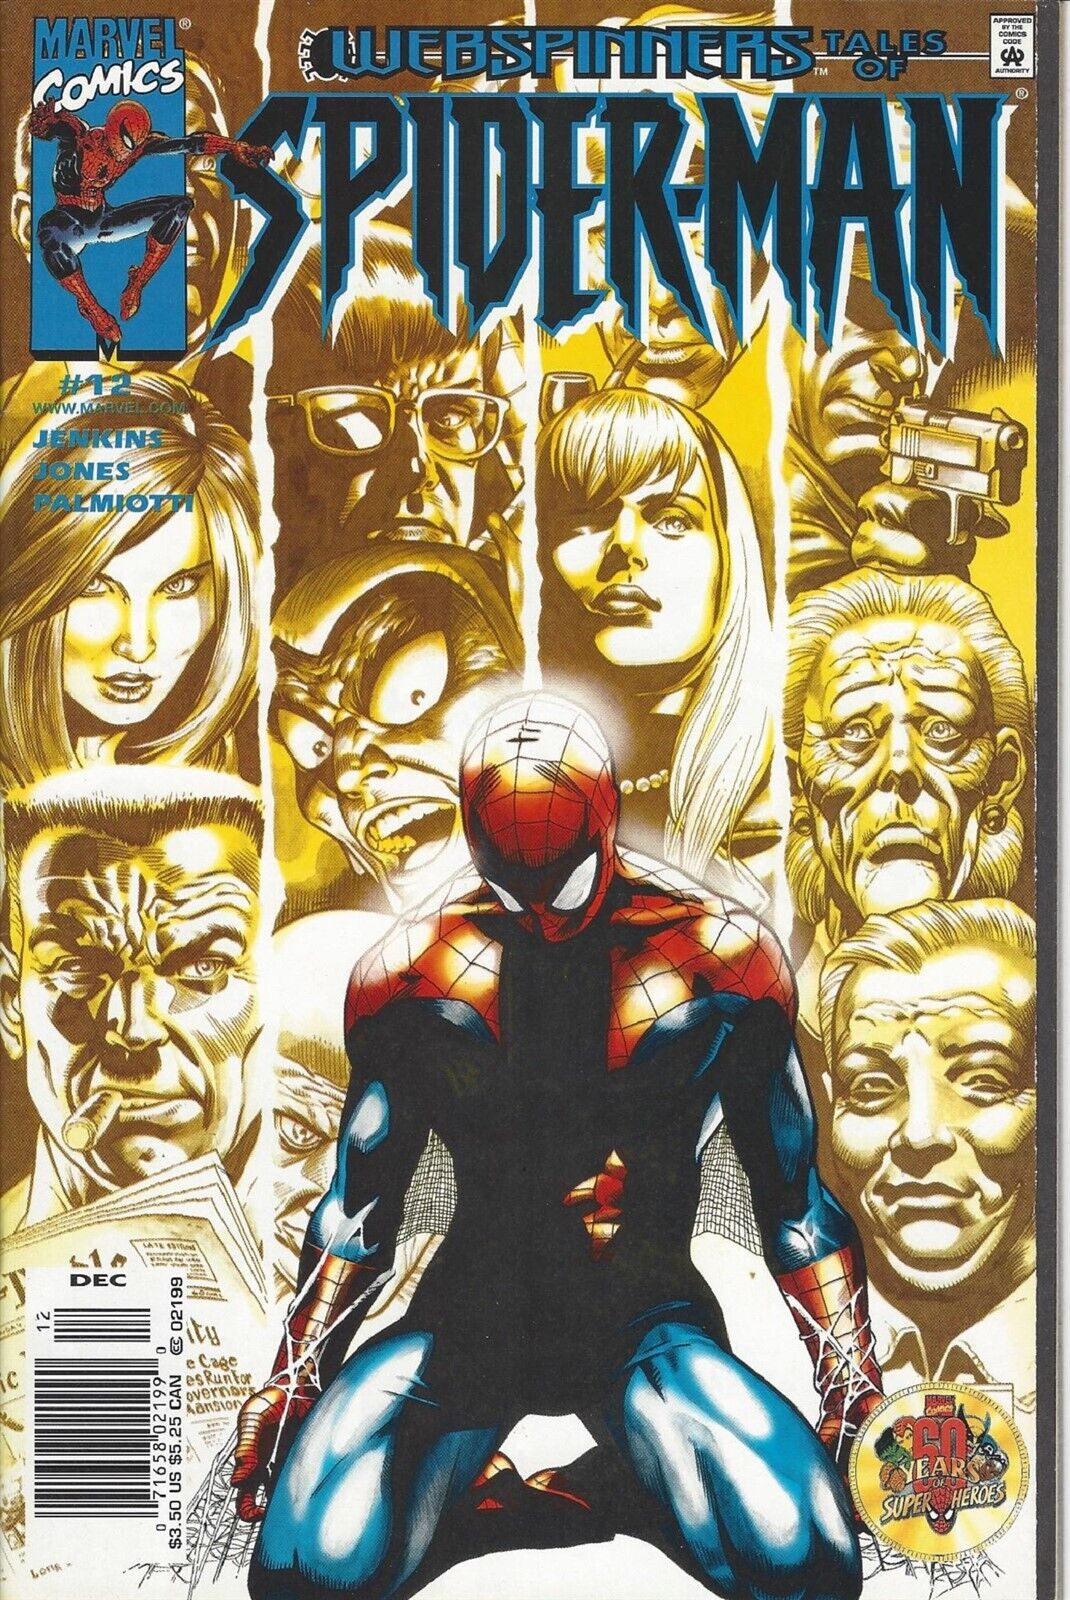 Webspinners: Tales of Spider-Man Vol. 1 #12 Perchance to Dream Part 3 of 3